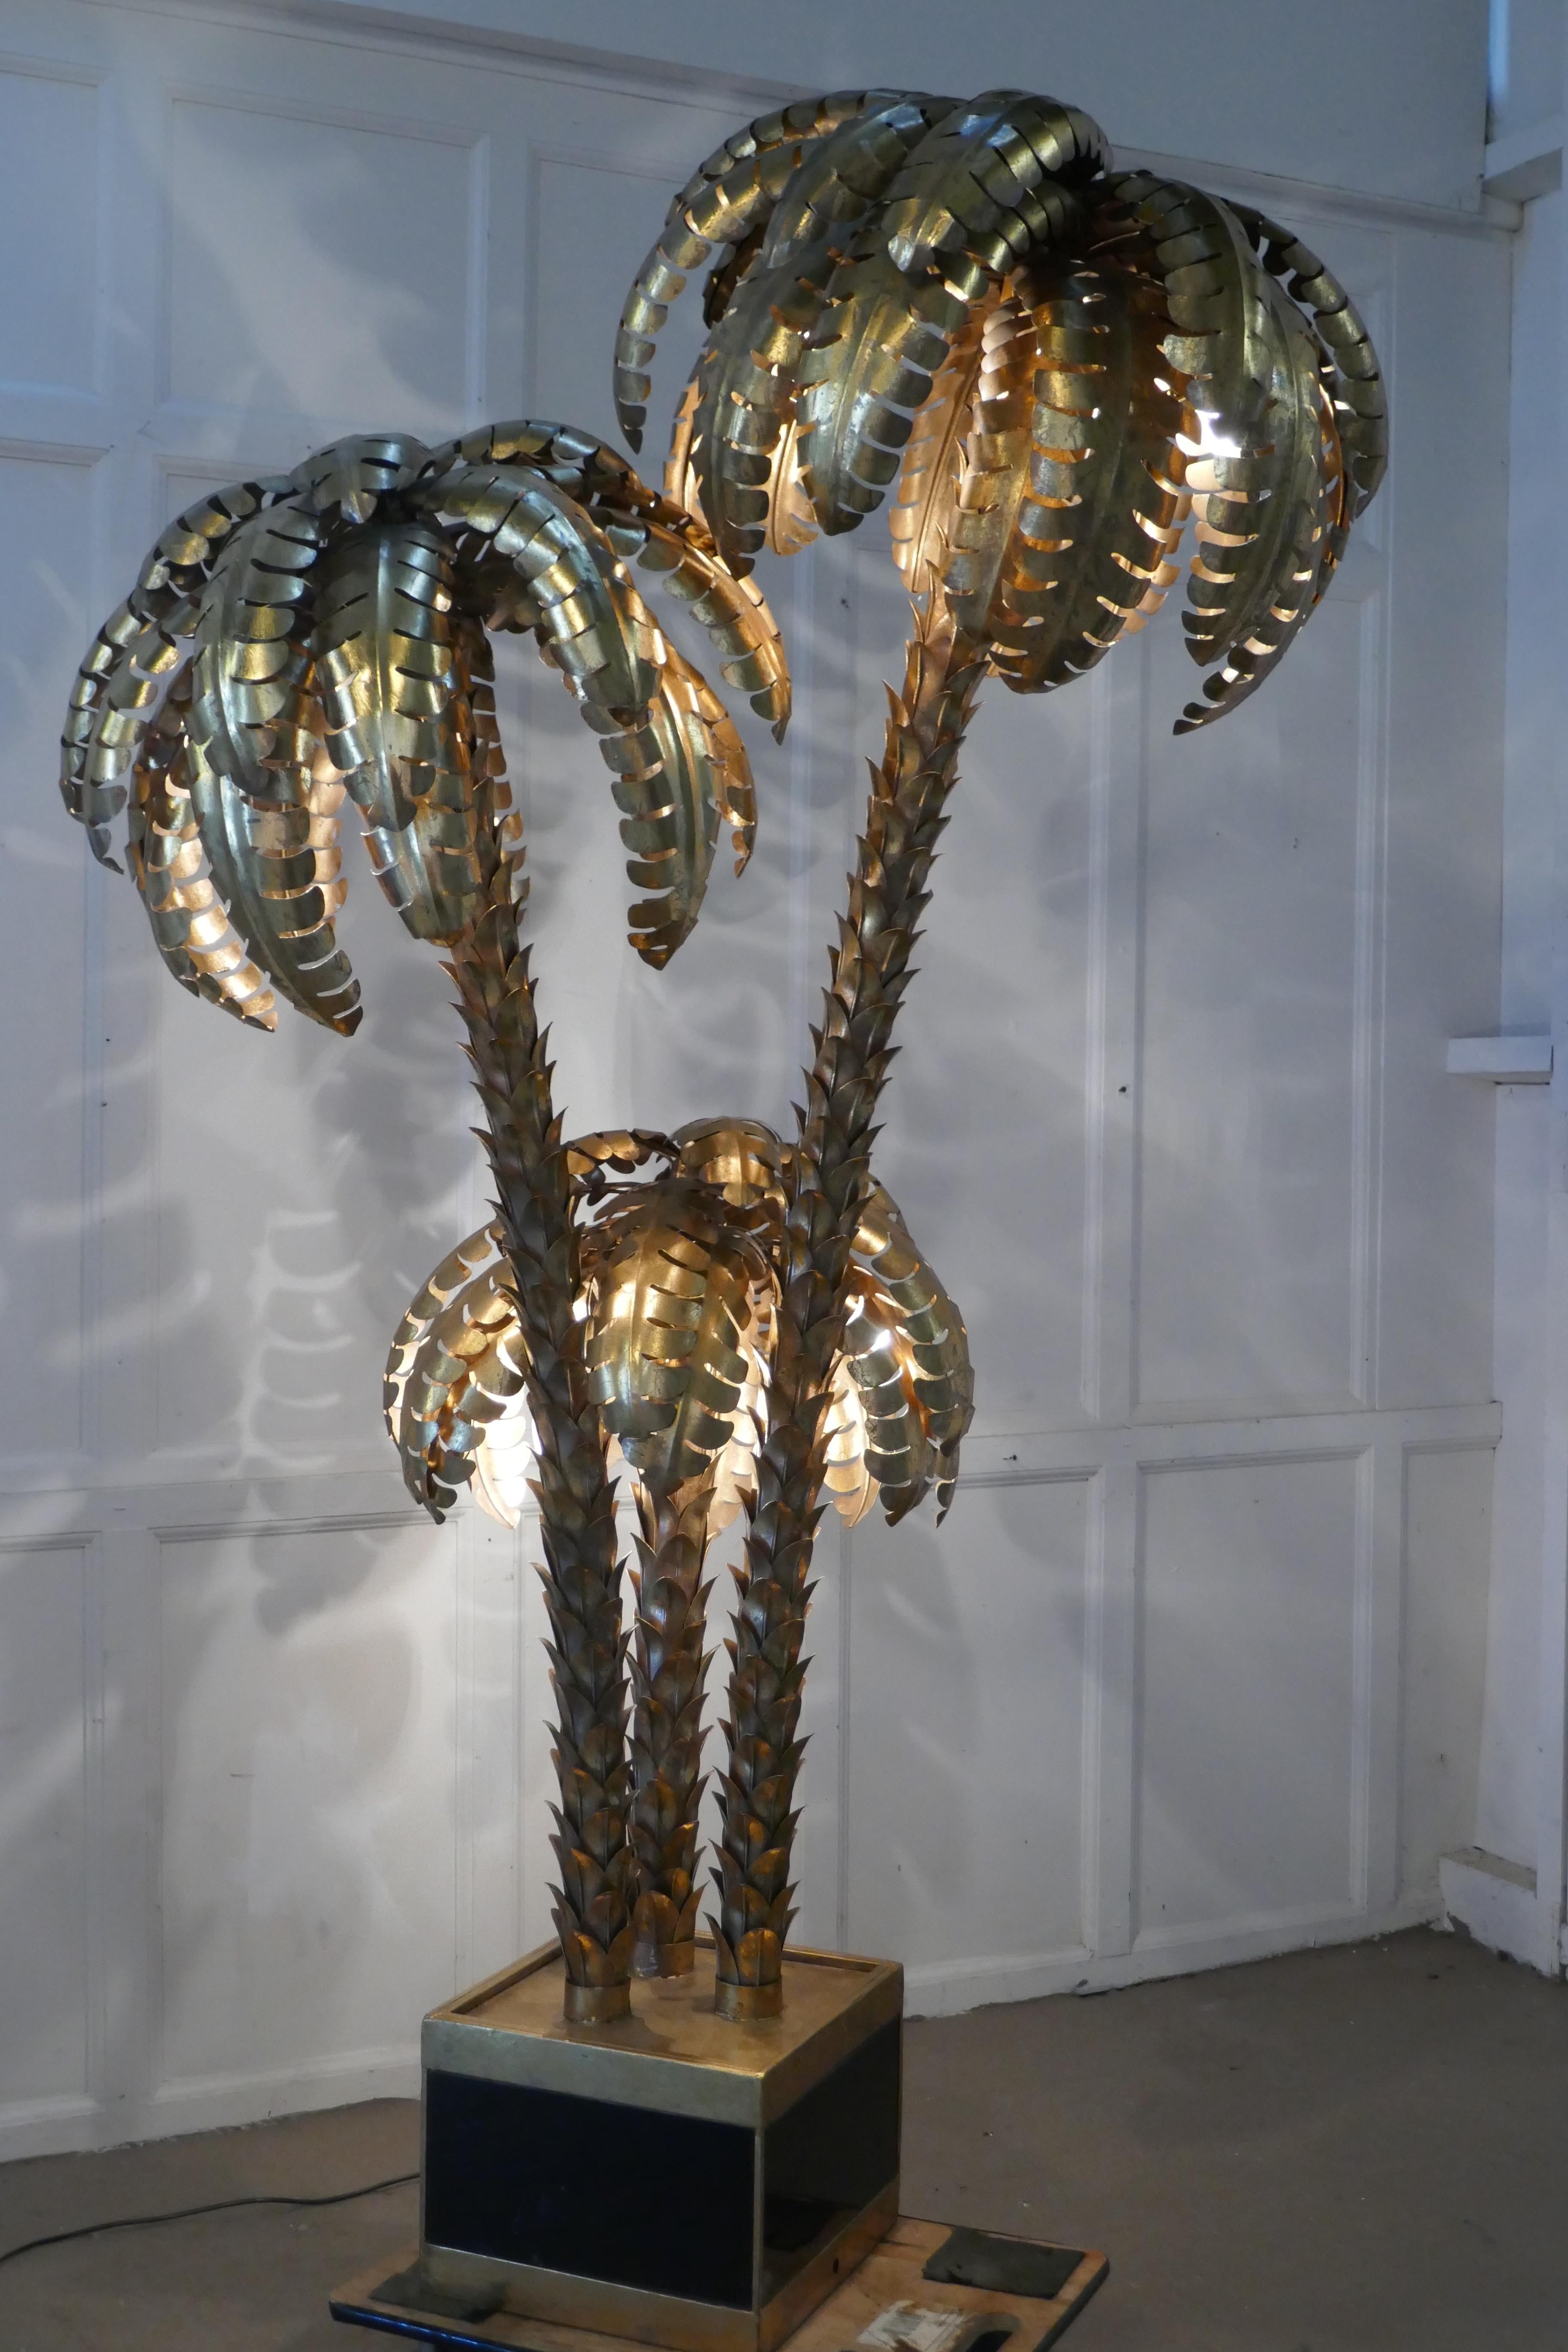 Palm Tree Tole Ware floor lamp, French, 1970-1980

Very rare Triple palm tree floor light, the lamp has 3 spiky trunks with abundant curling brass Palm leaves overhanging eac

The tree is 75” in height, it is about 42” across and heavy
JF90.